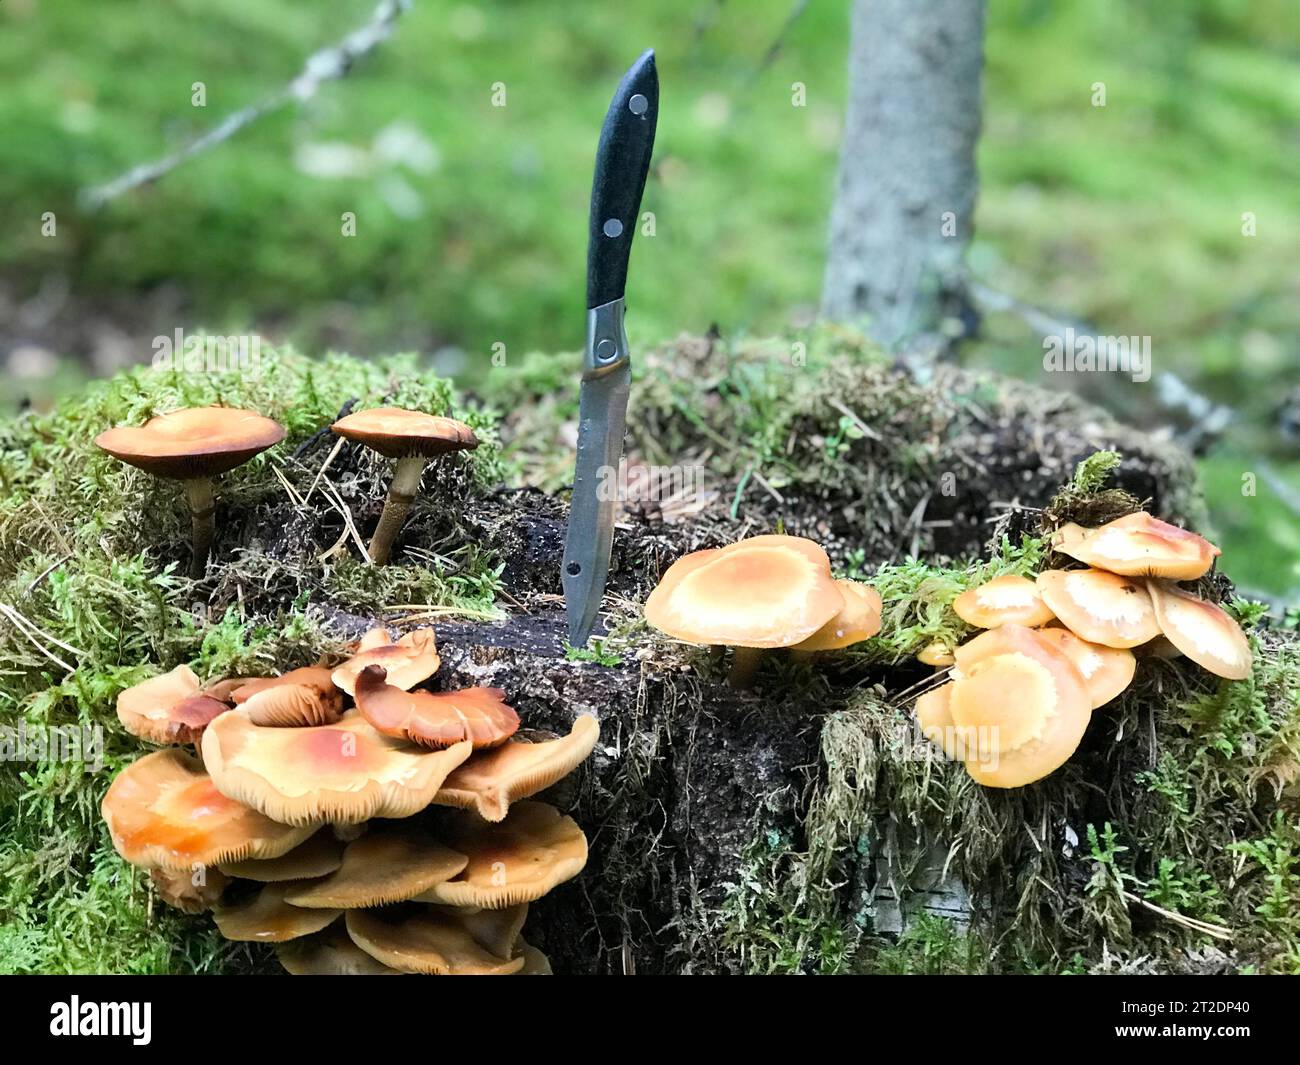 A sharp metal knife is stuck in a stump overgrown with green moss with delicious edible mushrooms in the forest against the backdrop of trees. Concept Stock Photo